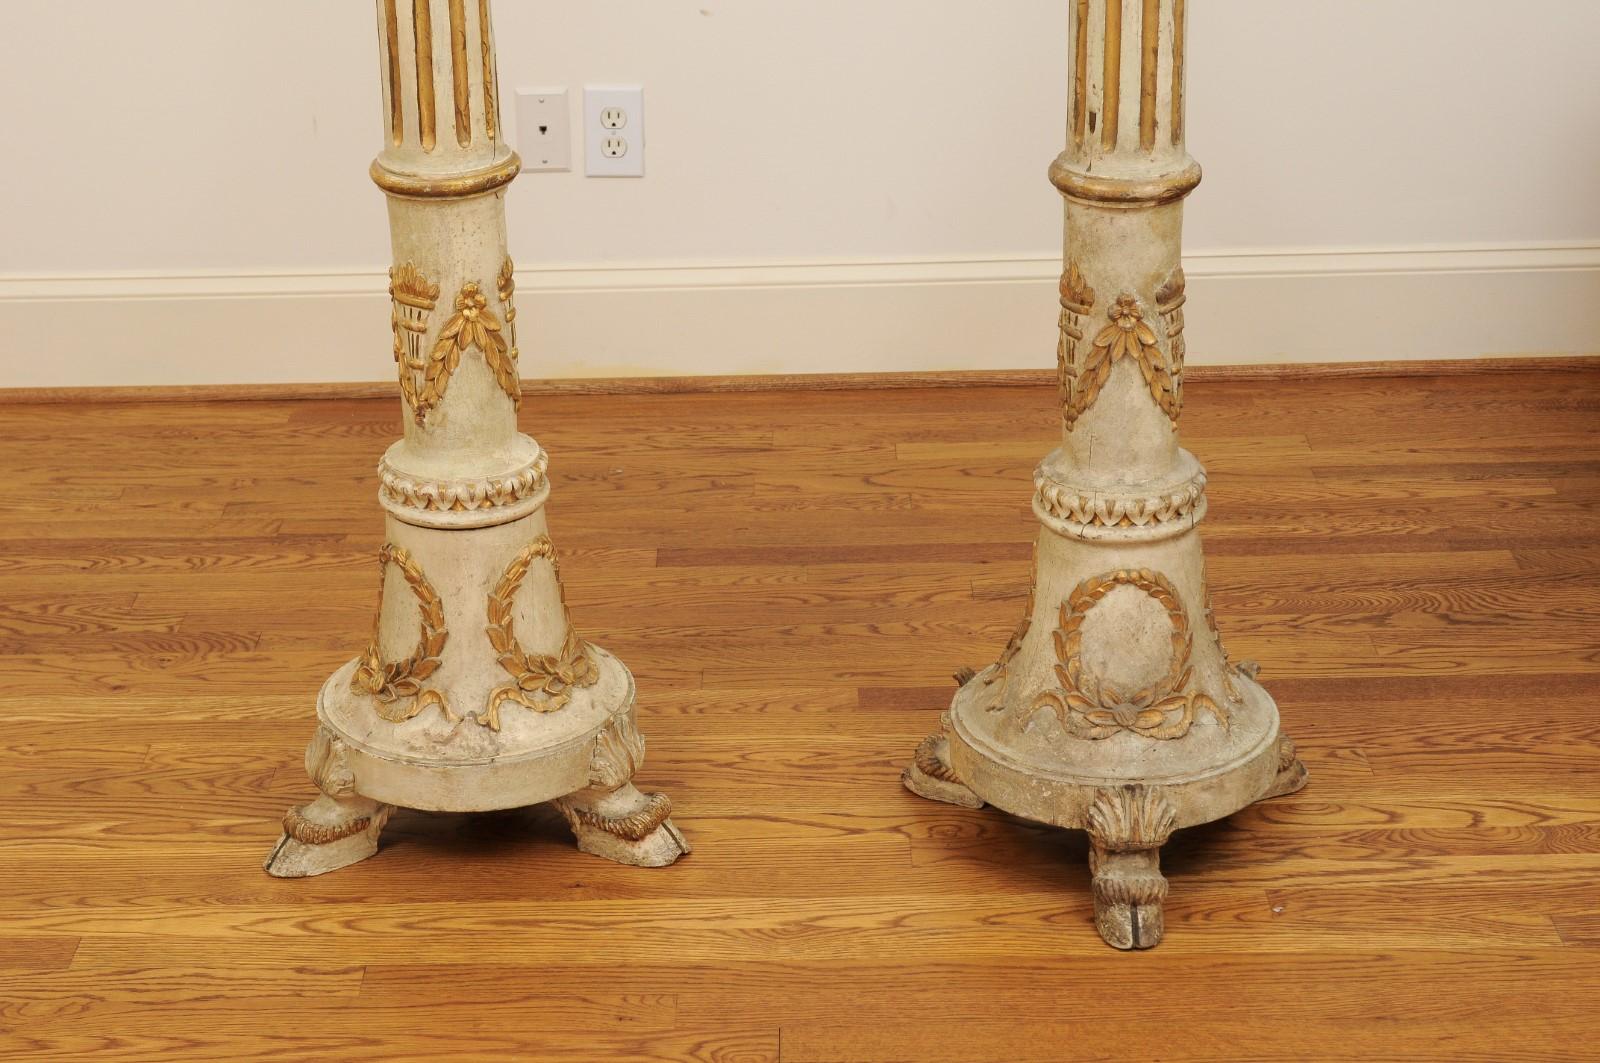 Pair of Tall French Napoléon III 1860s Candlesticks with Carved Gilt Motifs In Good Condition For Sale In Atlanta, GA